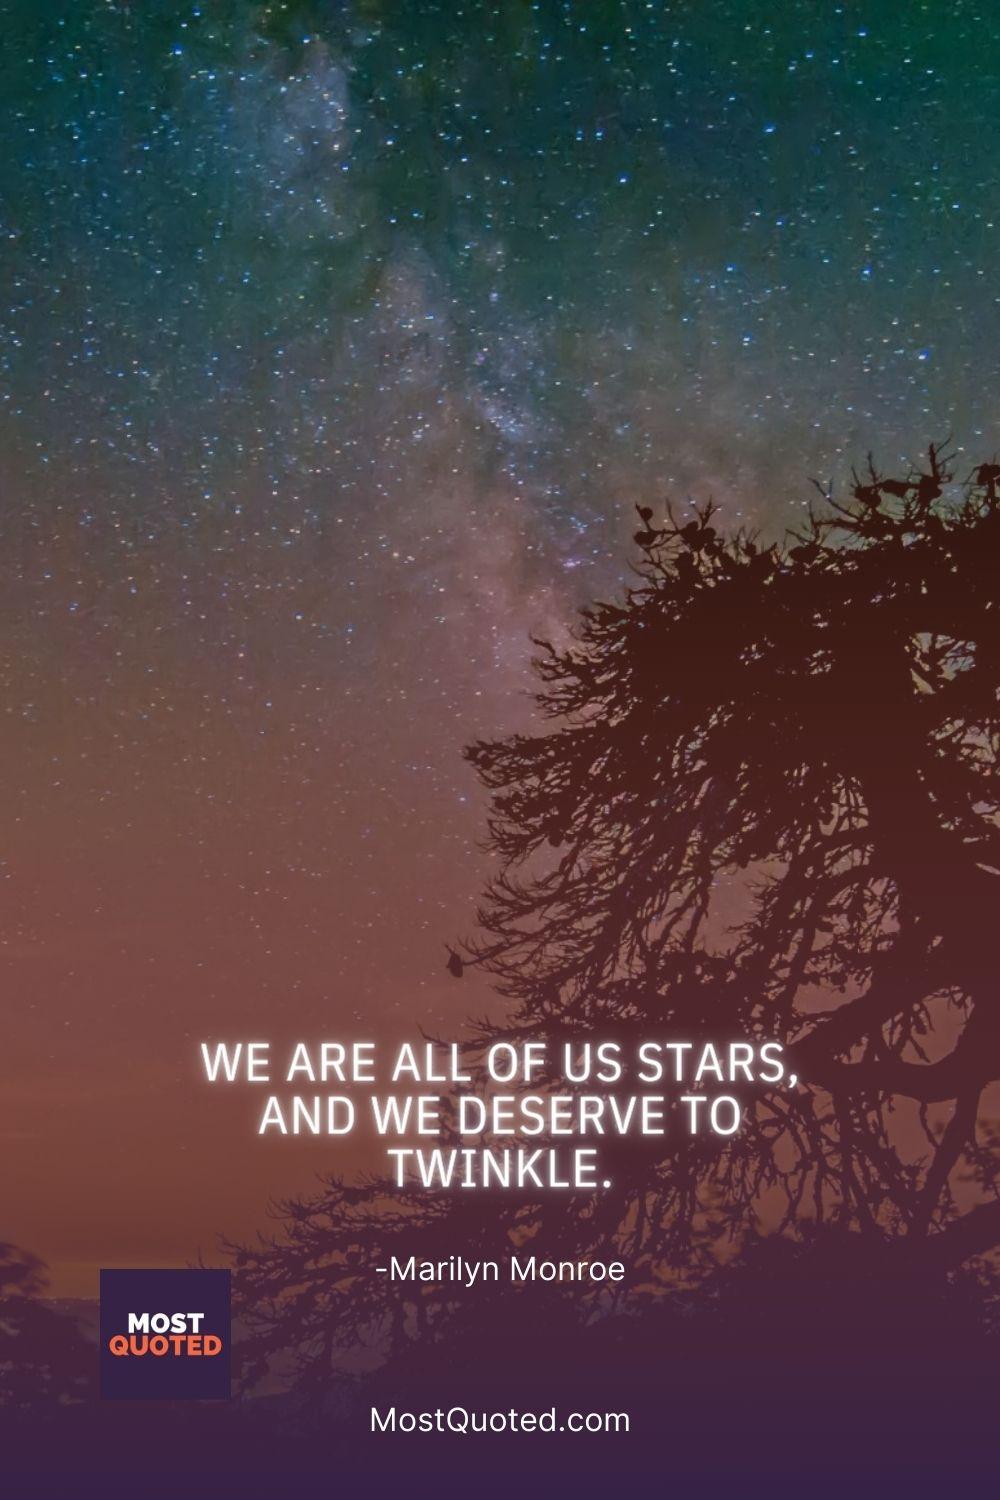 We are all of us stars, and we deserve to twinkle. - Marilyn Monroe